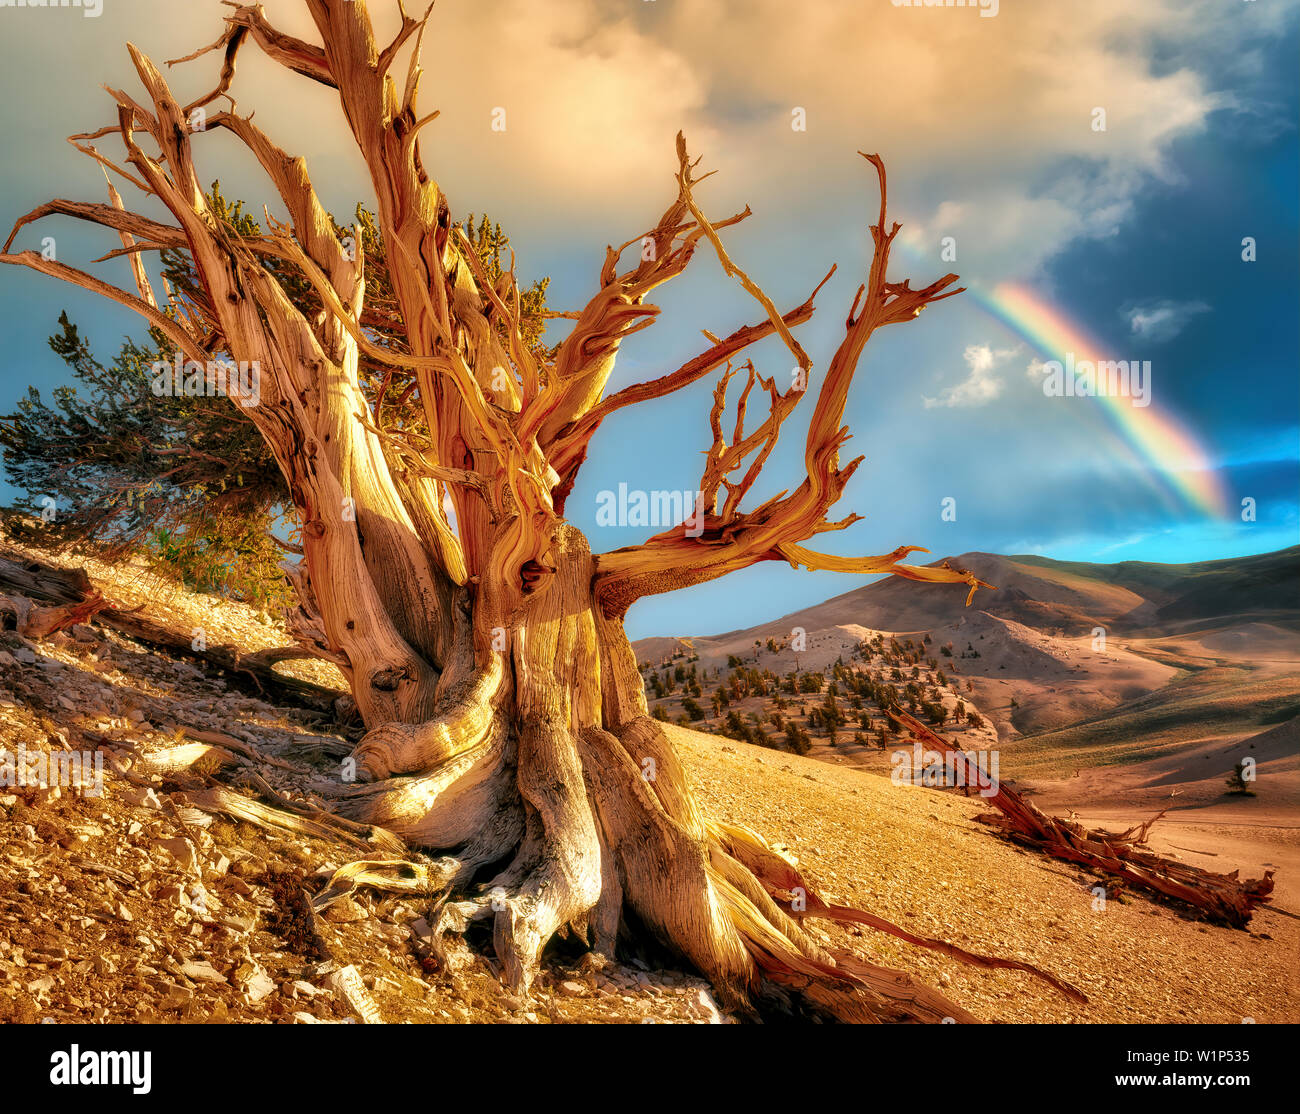 Widely branching Bristlecone Pine and rainbow. Ancient Bristlecone Pine Forest, California. Stock Photo